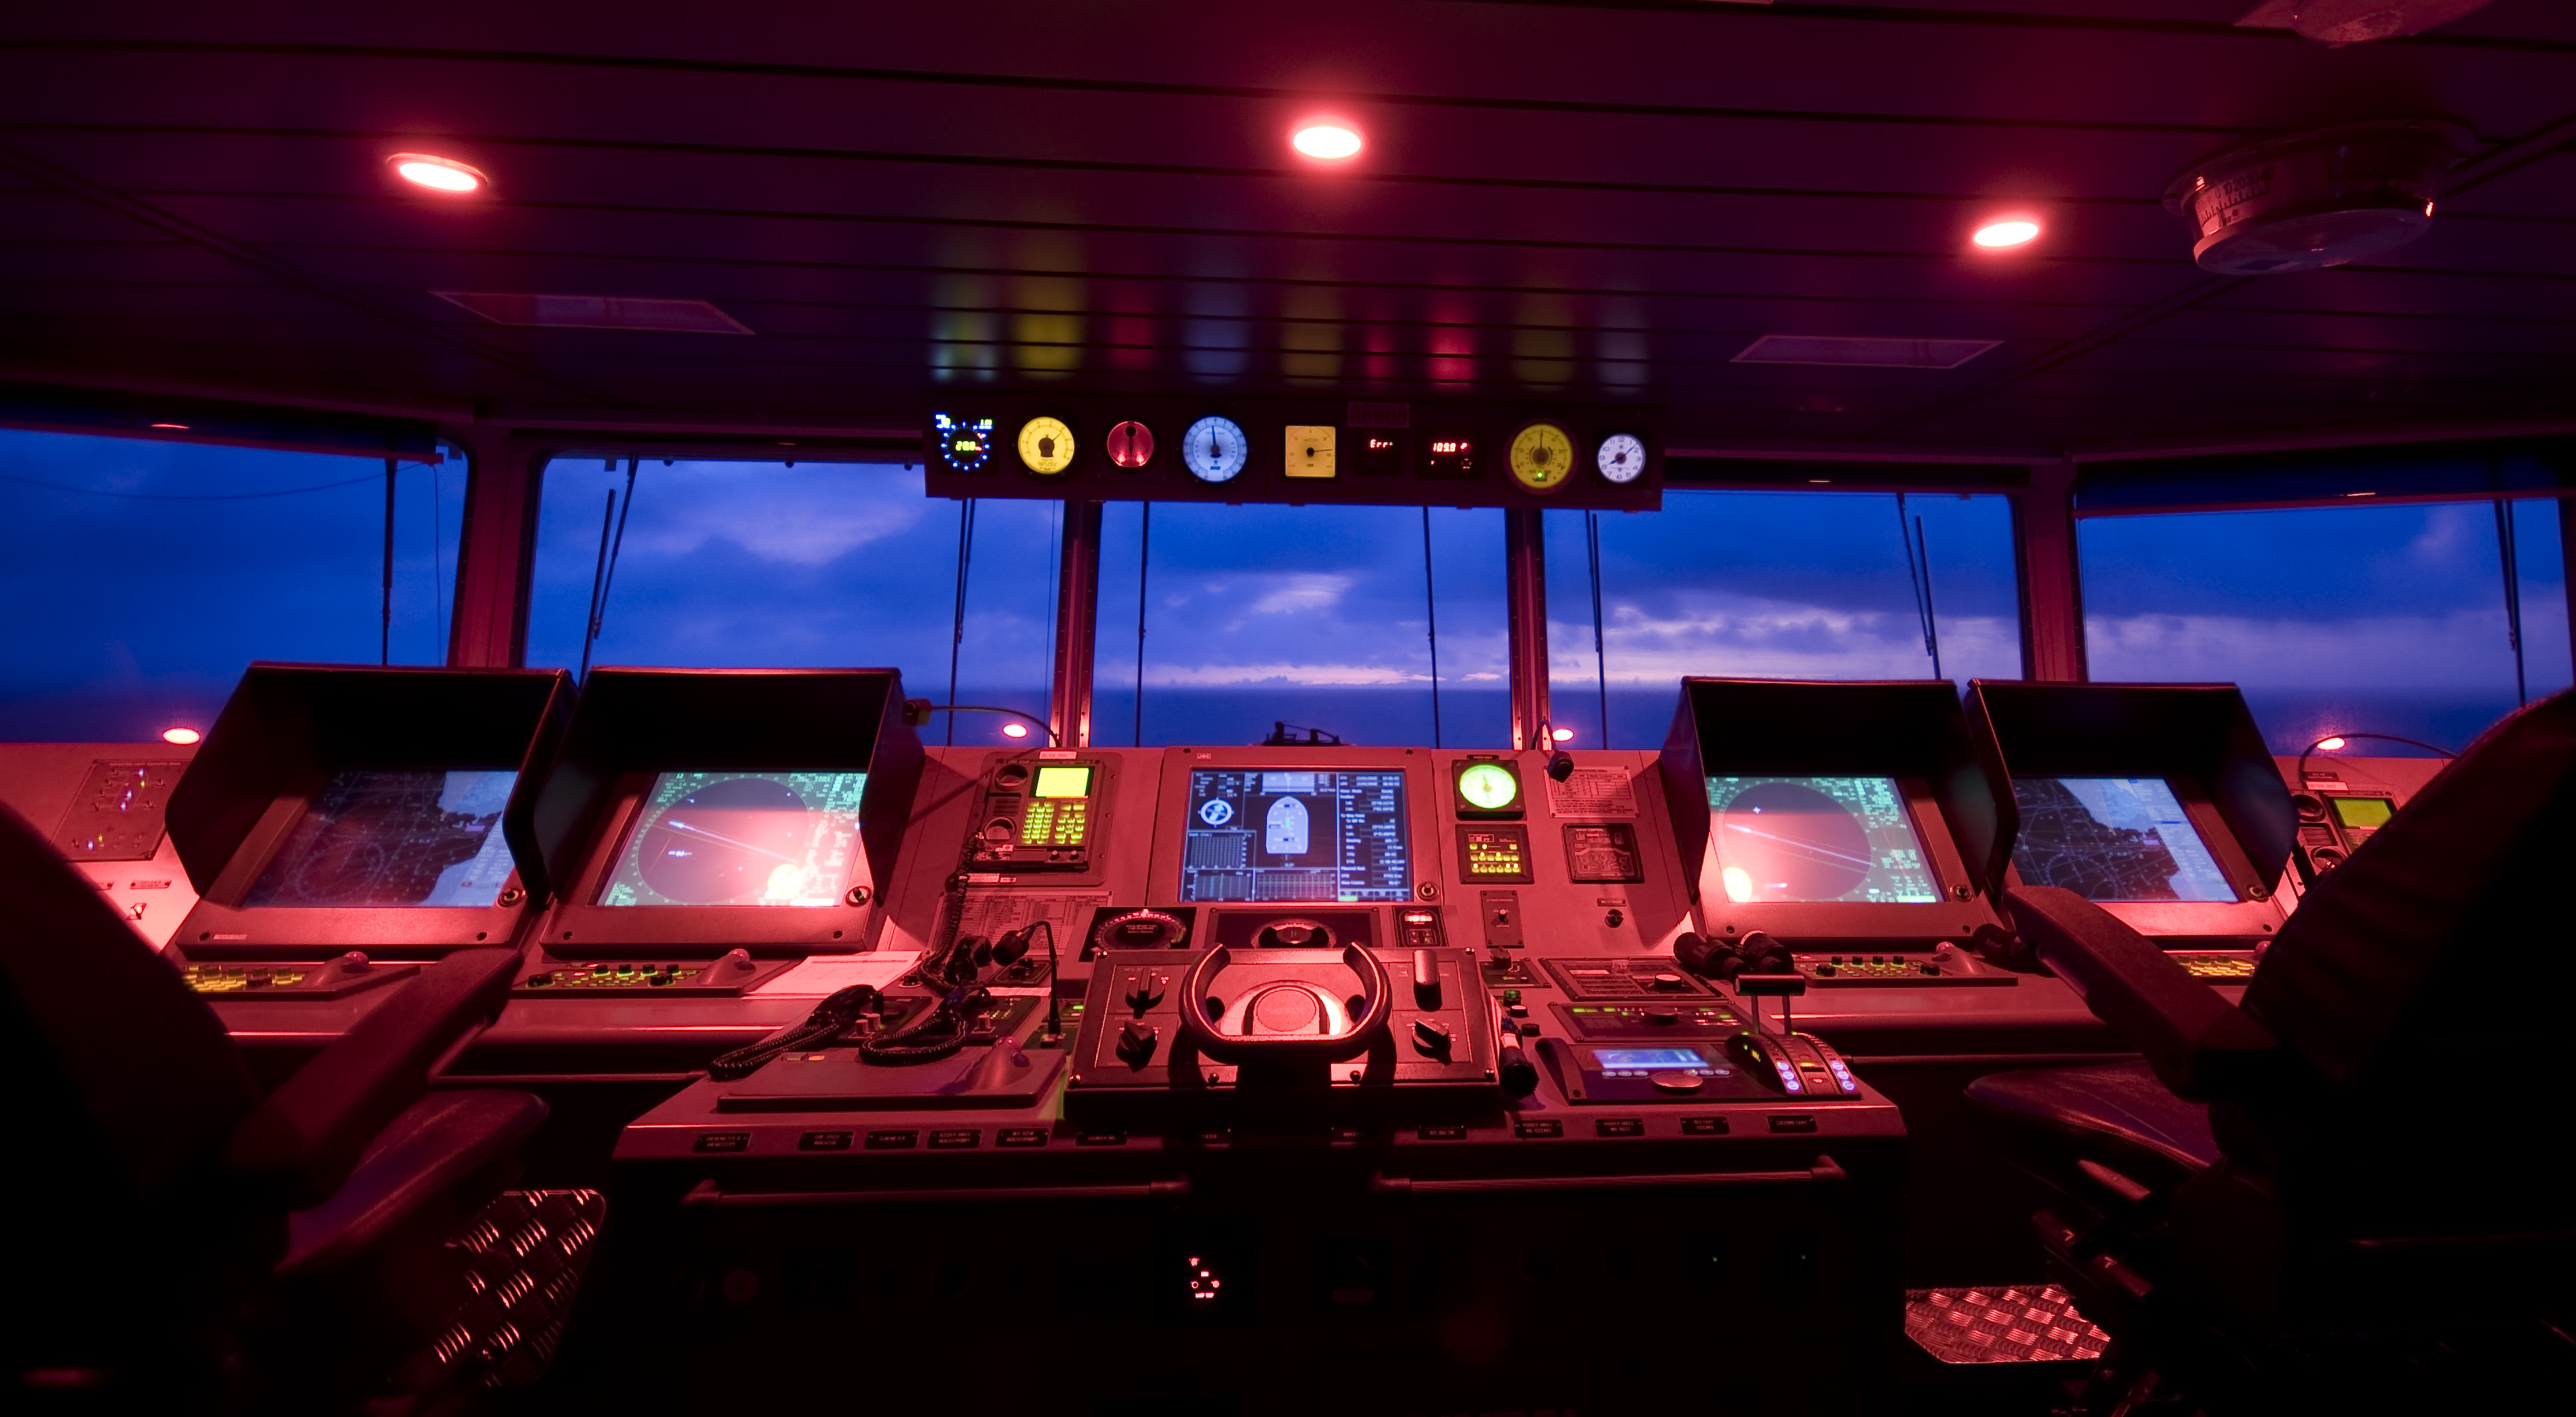 This is the center of command of a ship